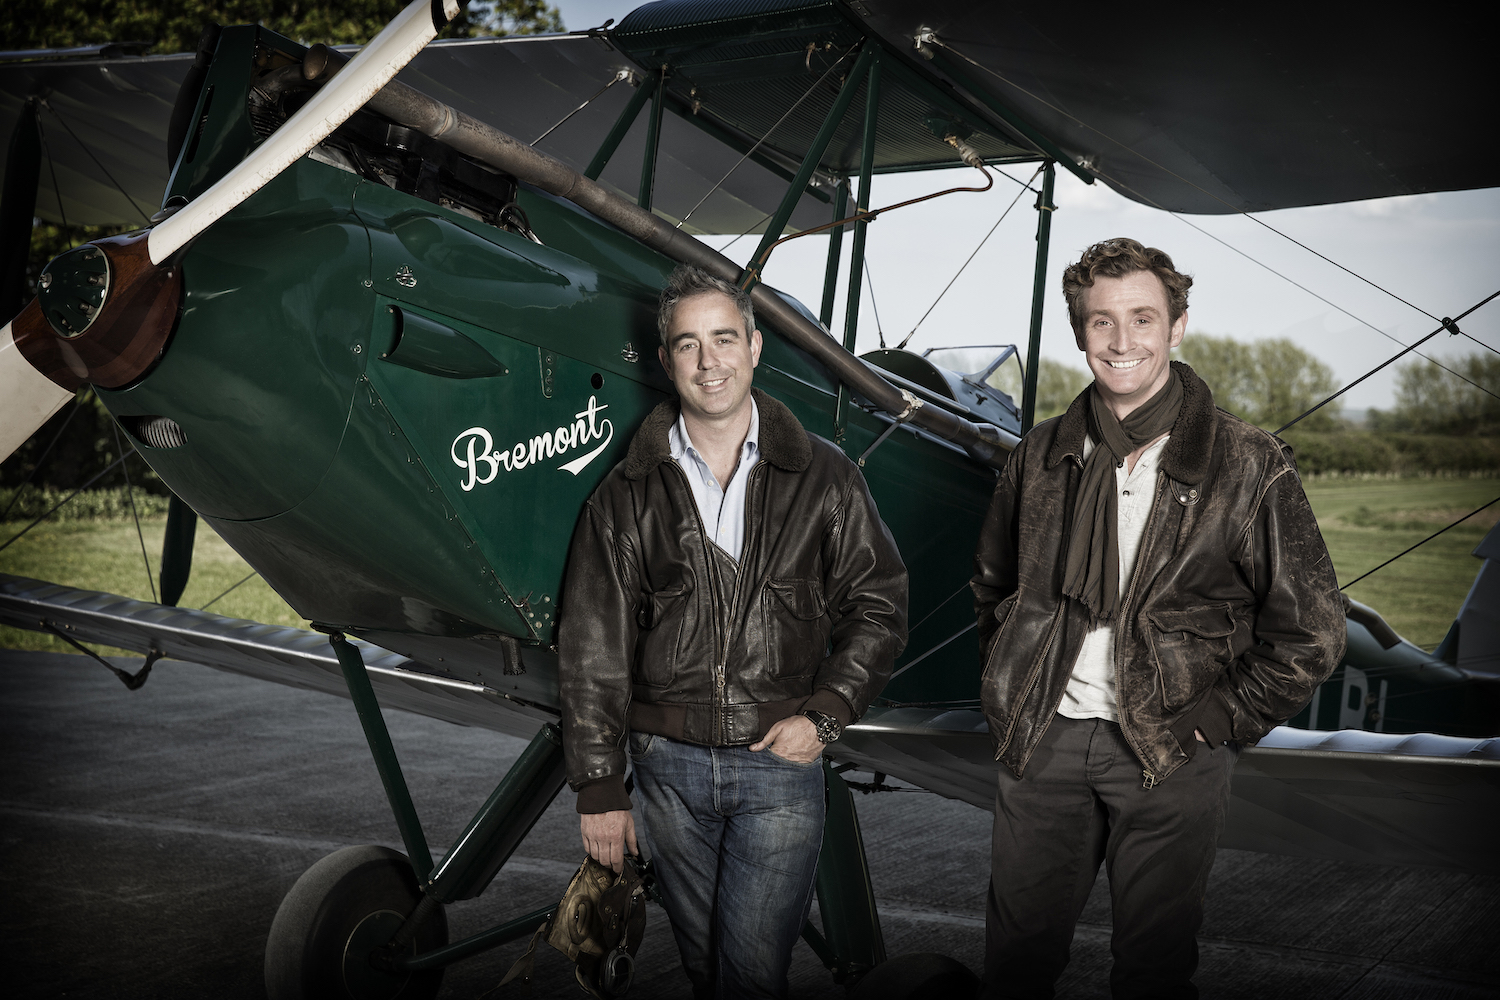 Giles English (left) and his brother Nick English standing in front of a small plane.